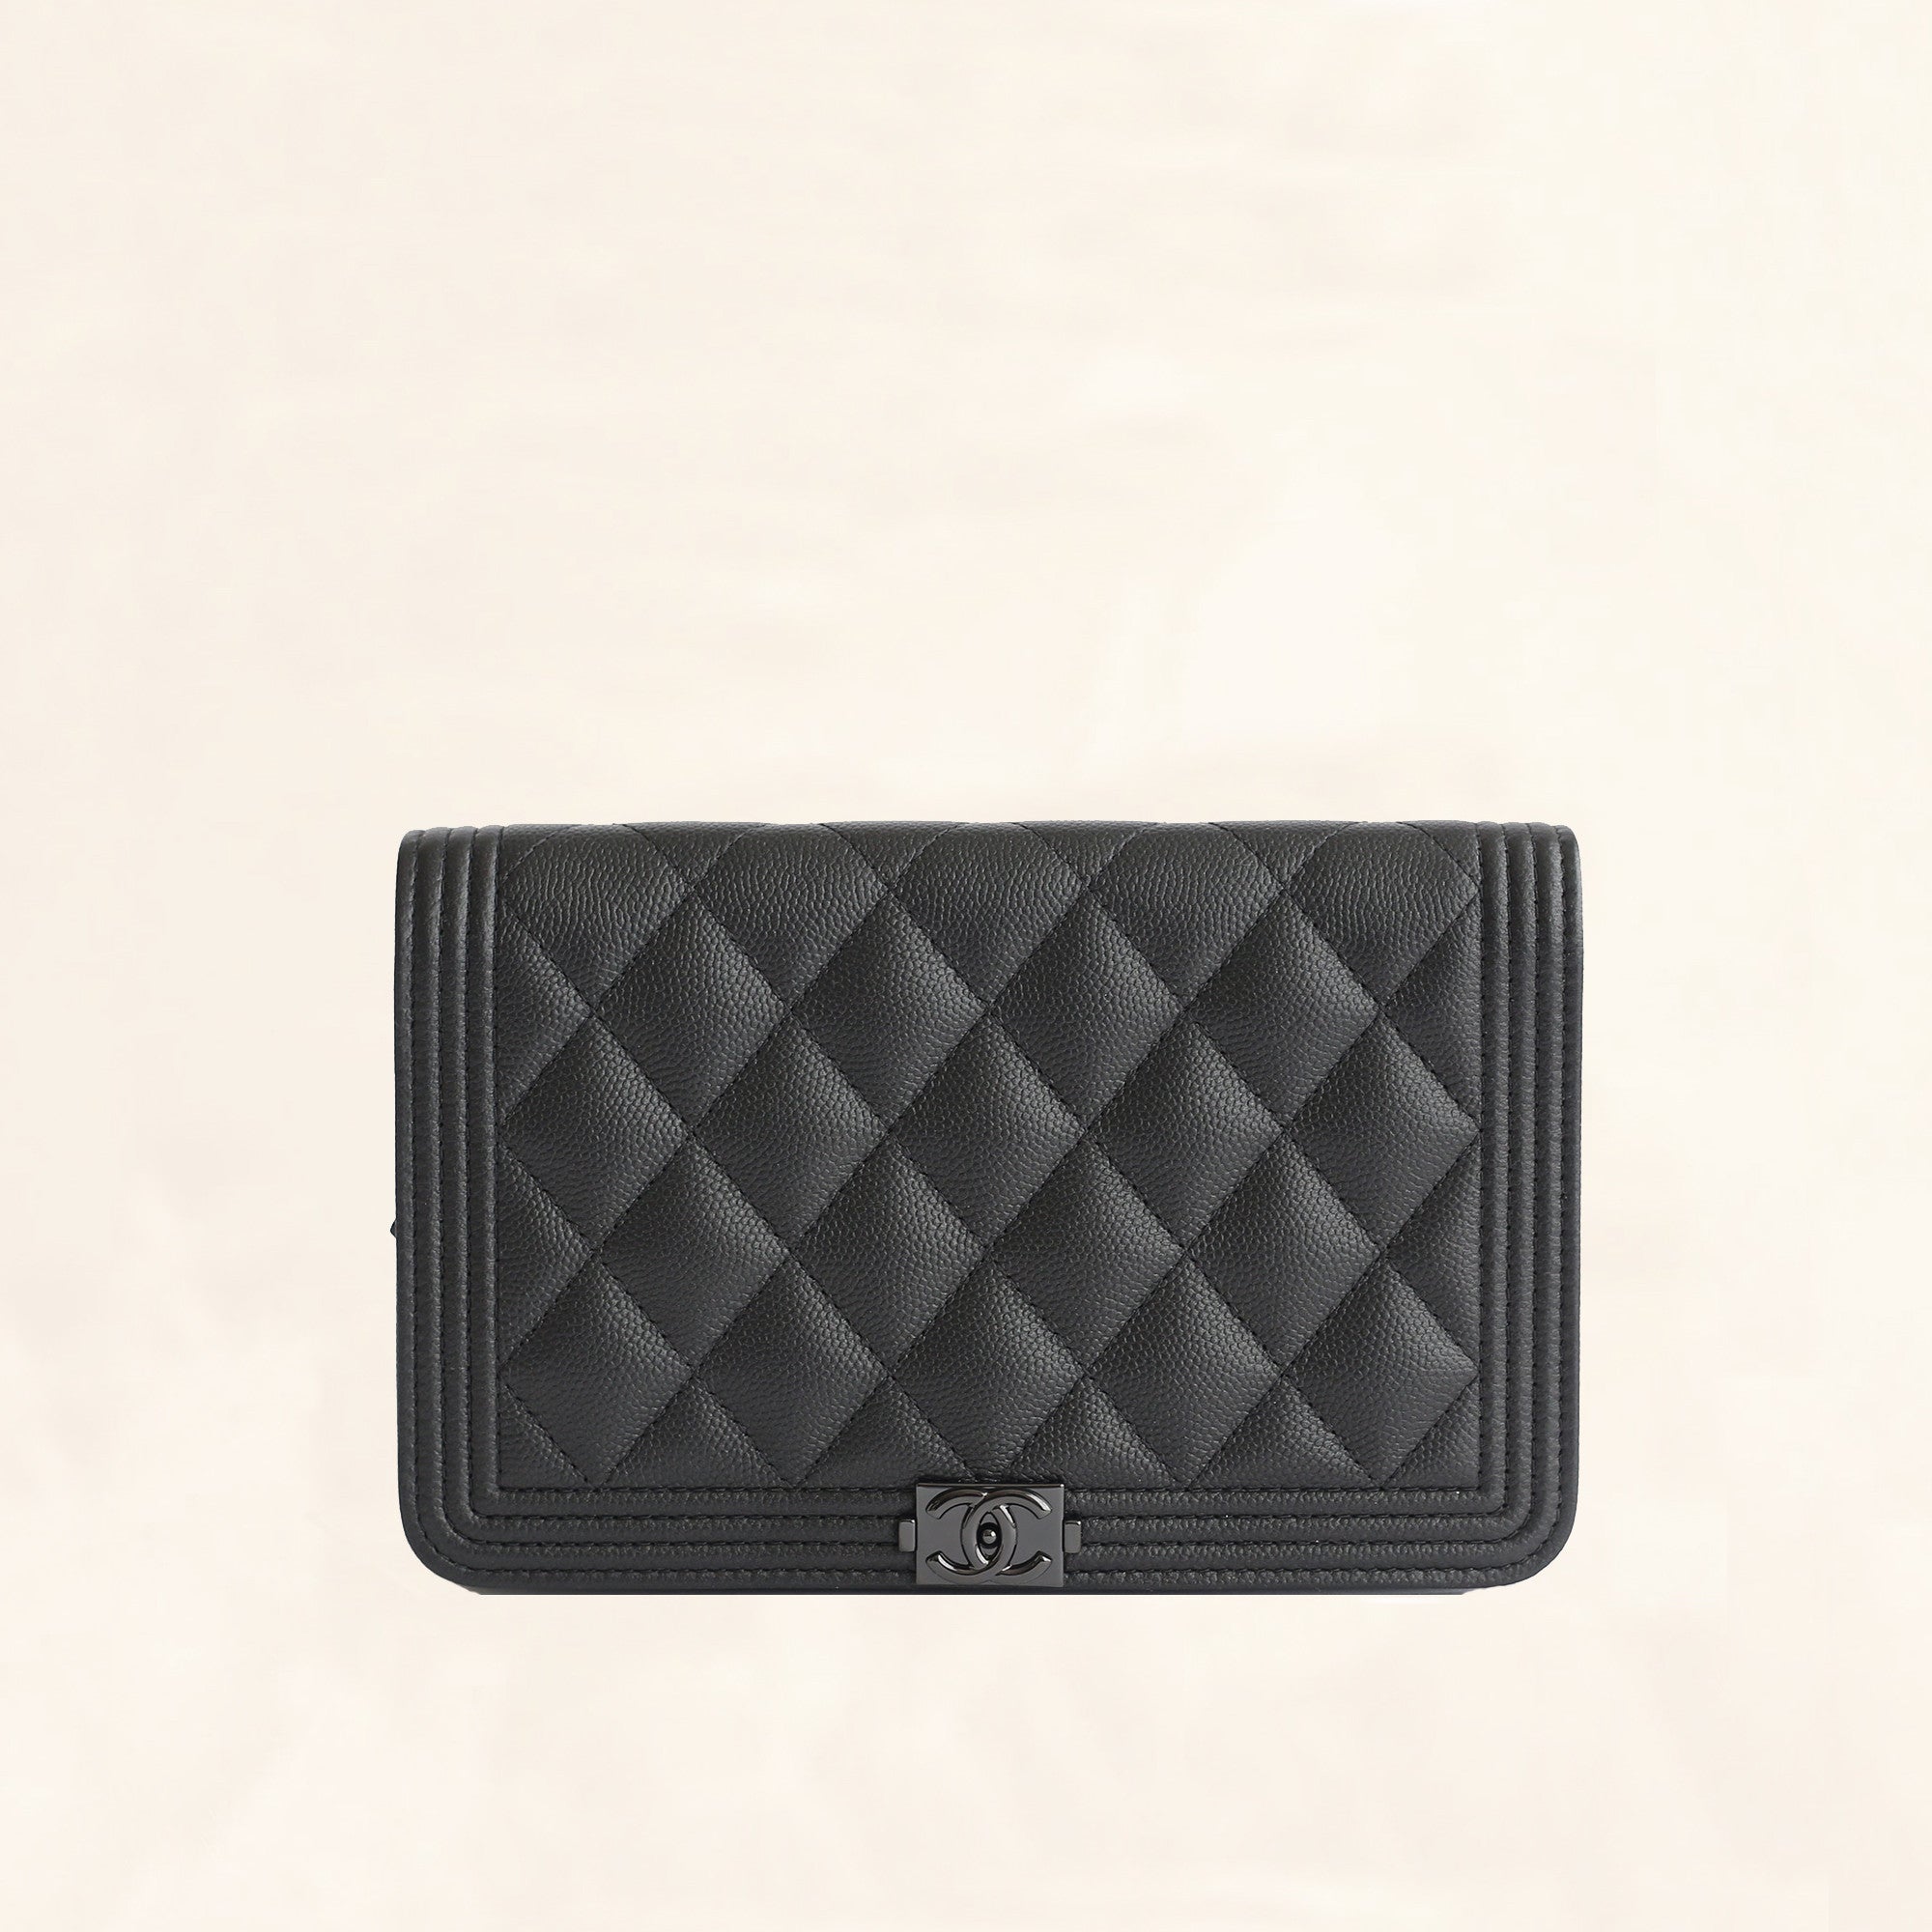 Boy CHANEL Wallet H4.1in × W7.6in Without BOX 21004574